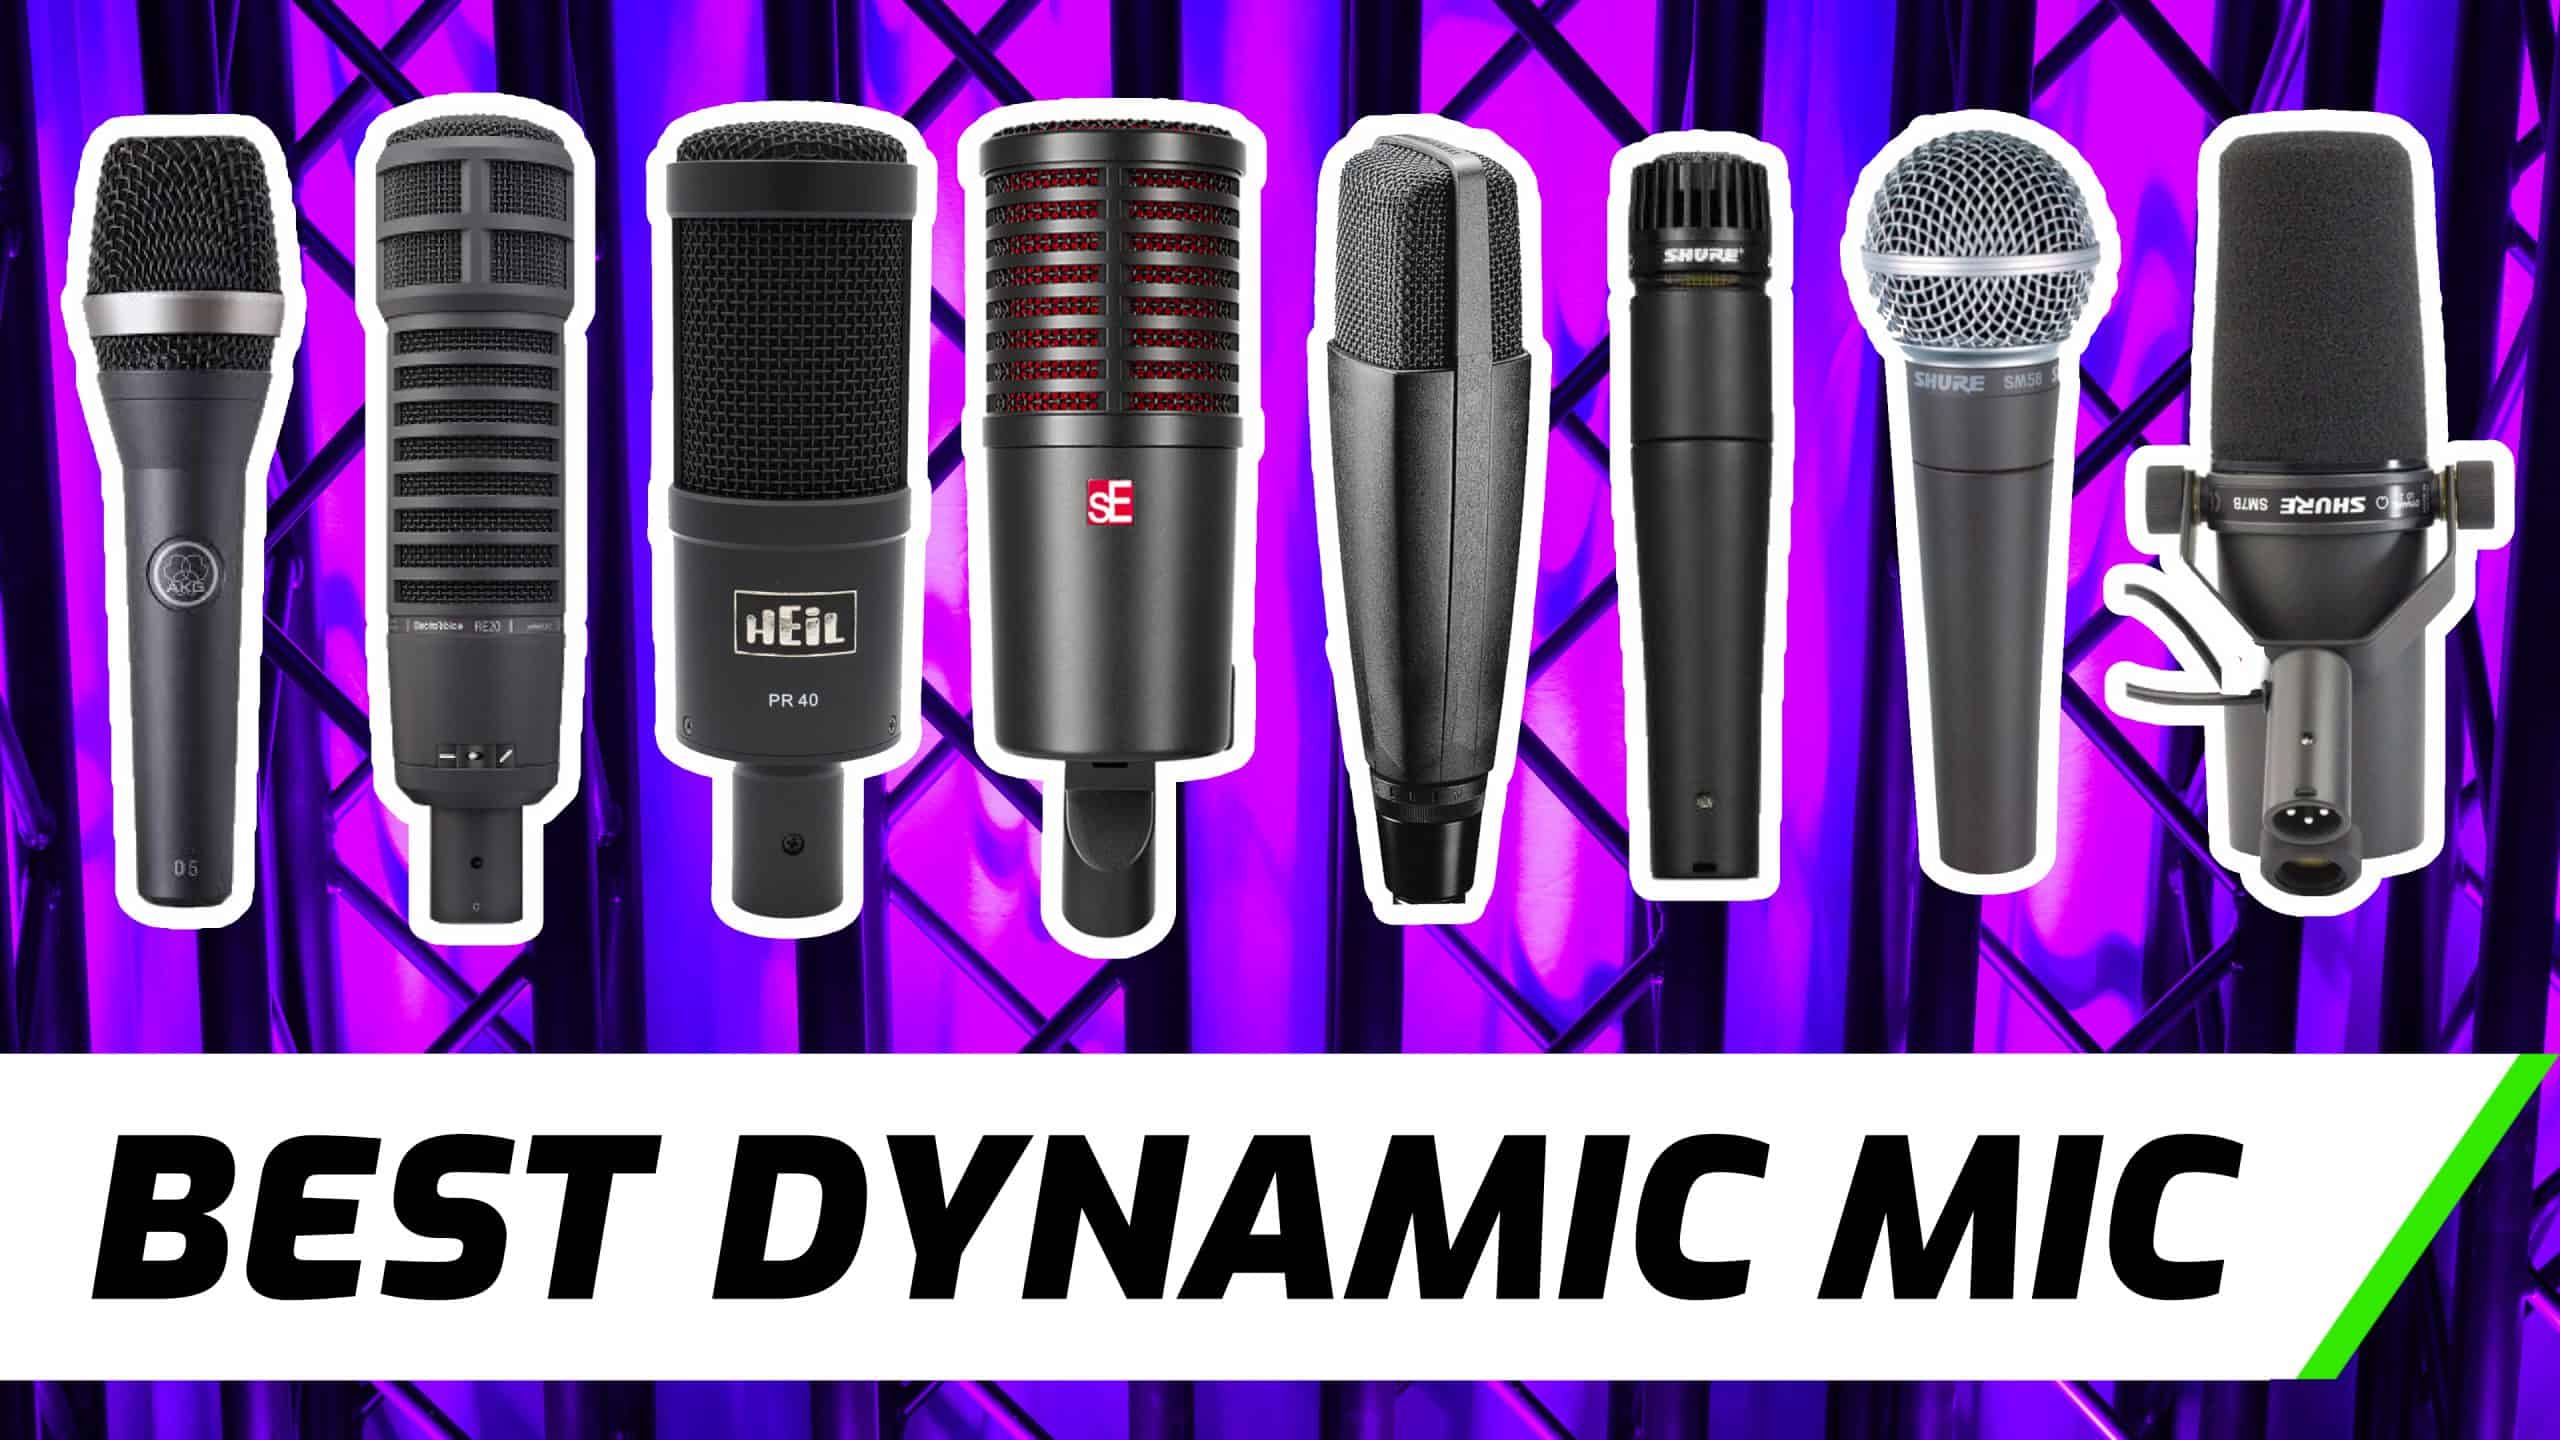 Improve The Sound Of Your Dynamic Microphone For Voice-Overs 